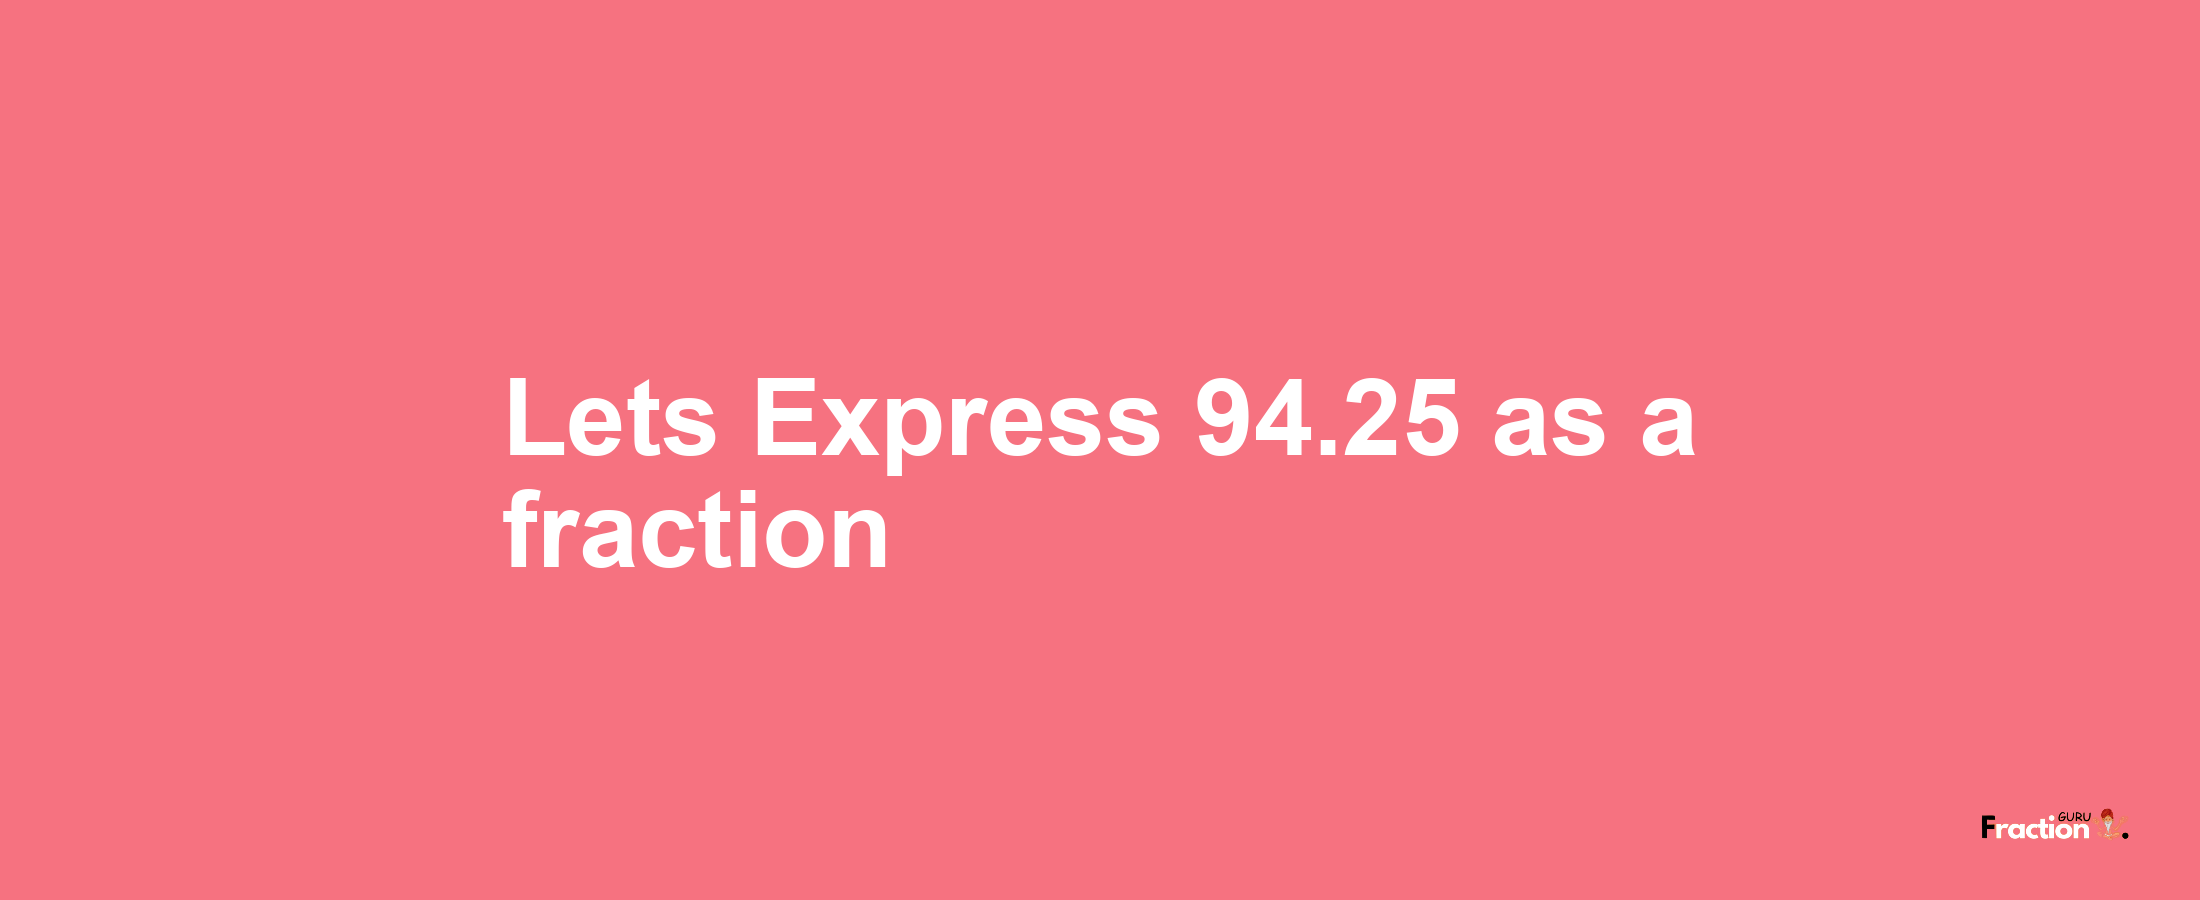 Lets Express 94.25 as afraction